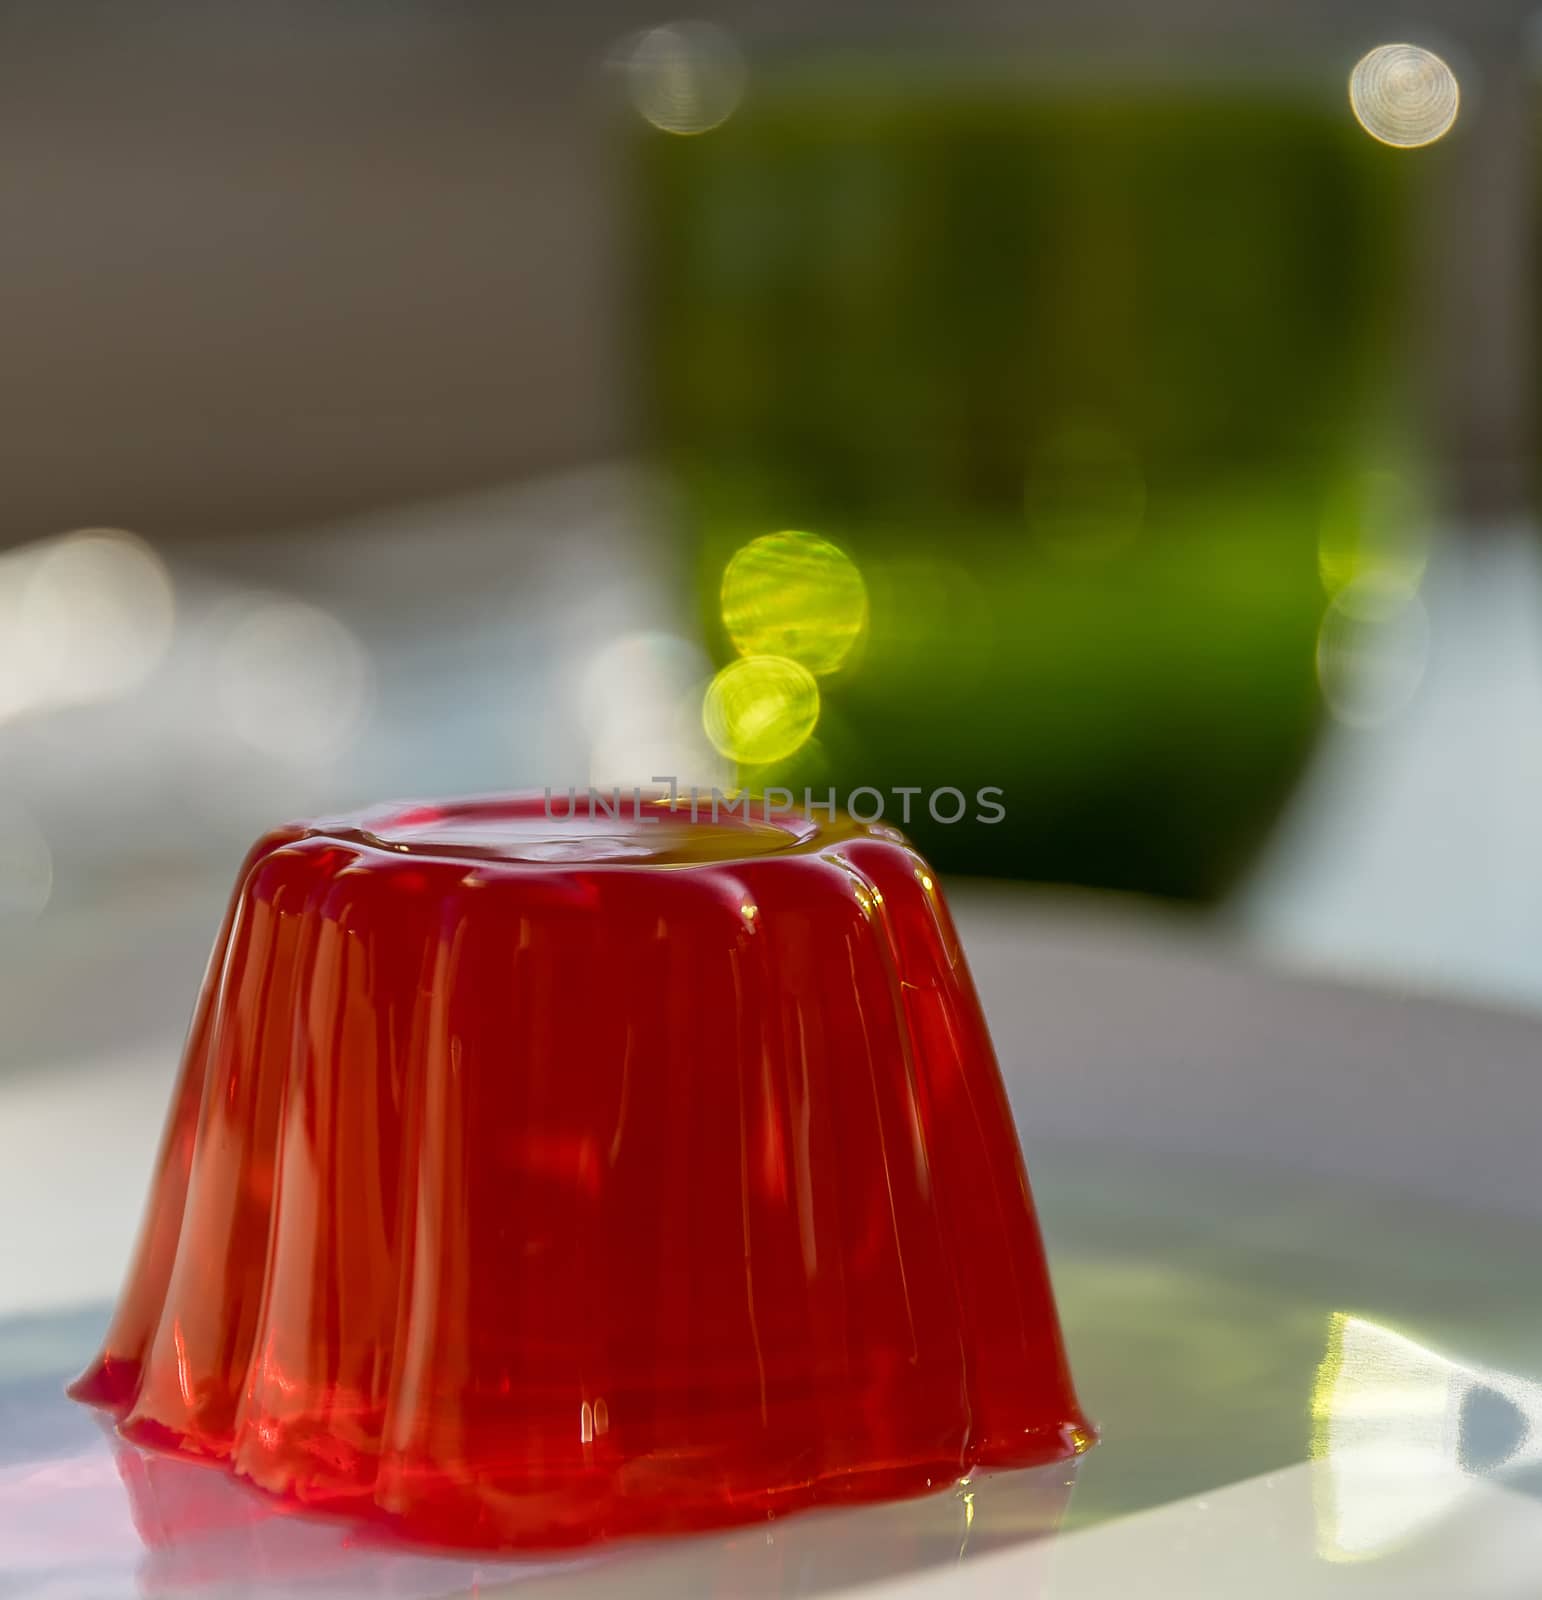 Close-up of a strawberry jelly dessert with a green glass in the background